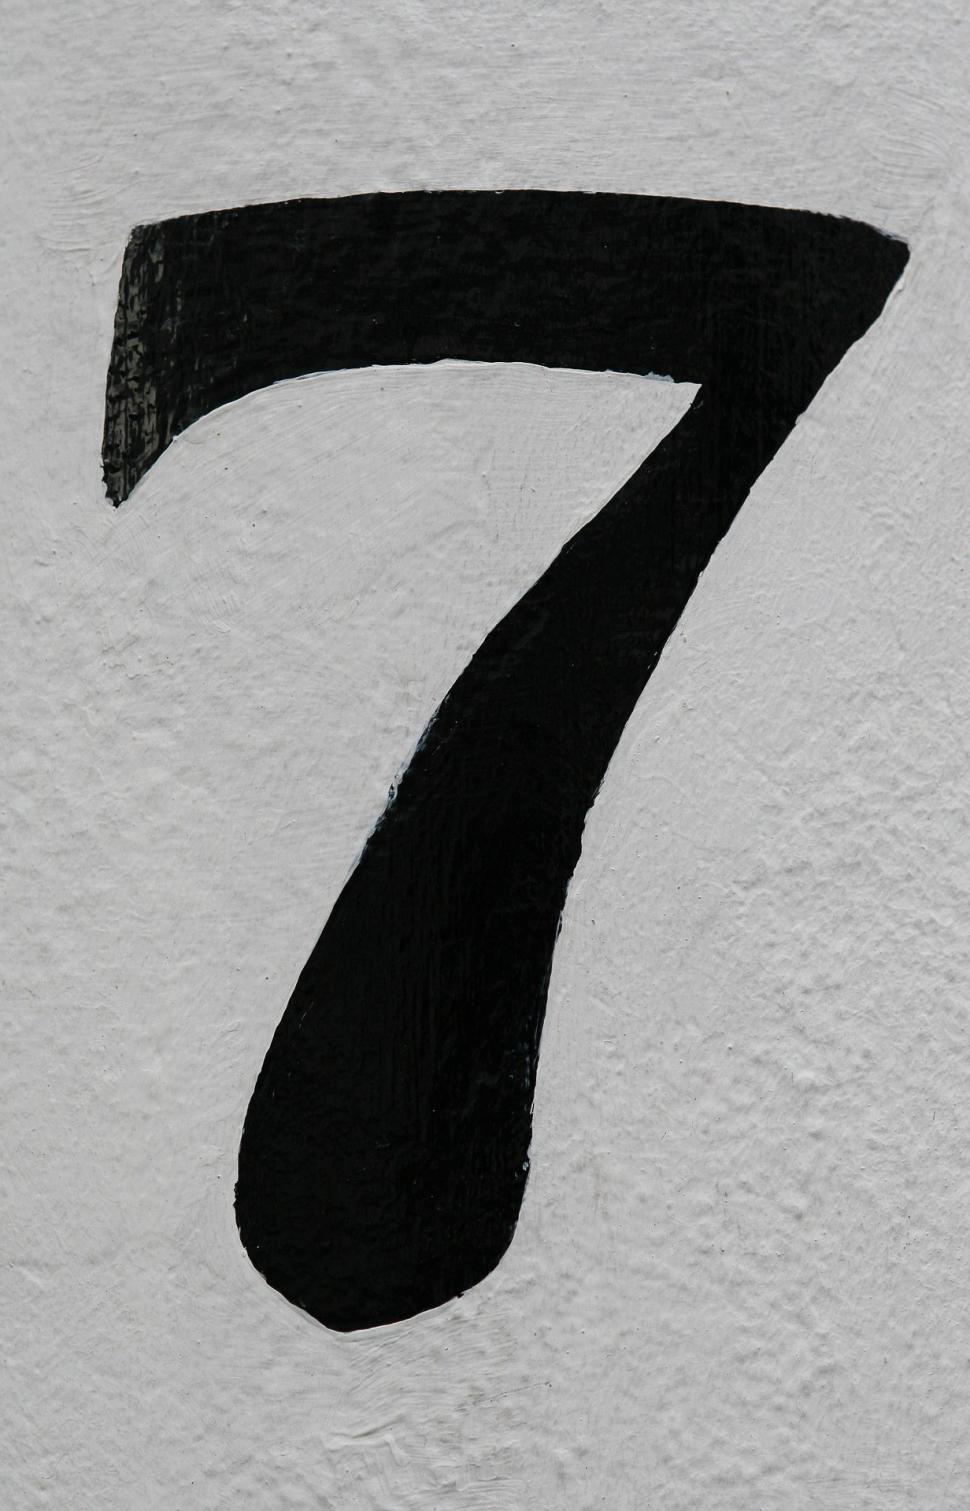 Free Image of Black Number Seven on White Wall 